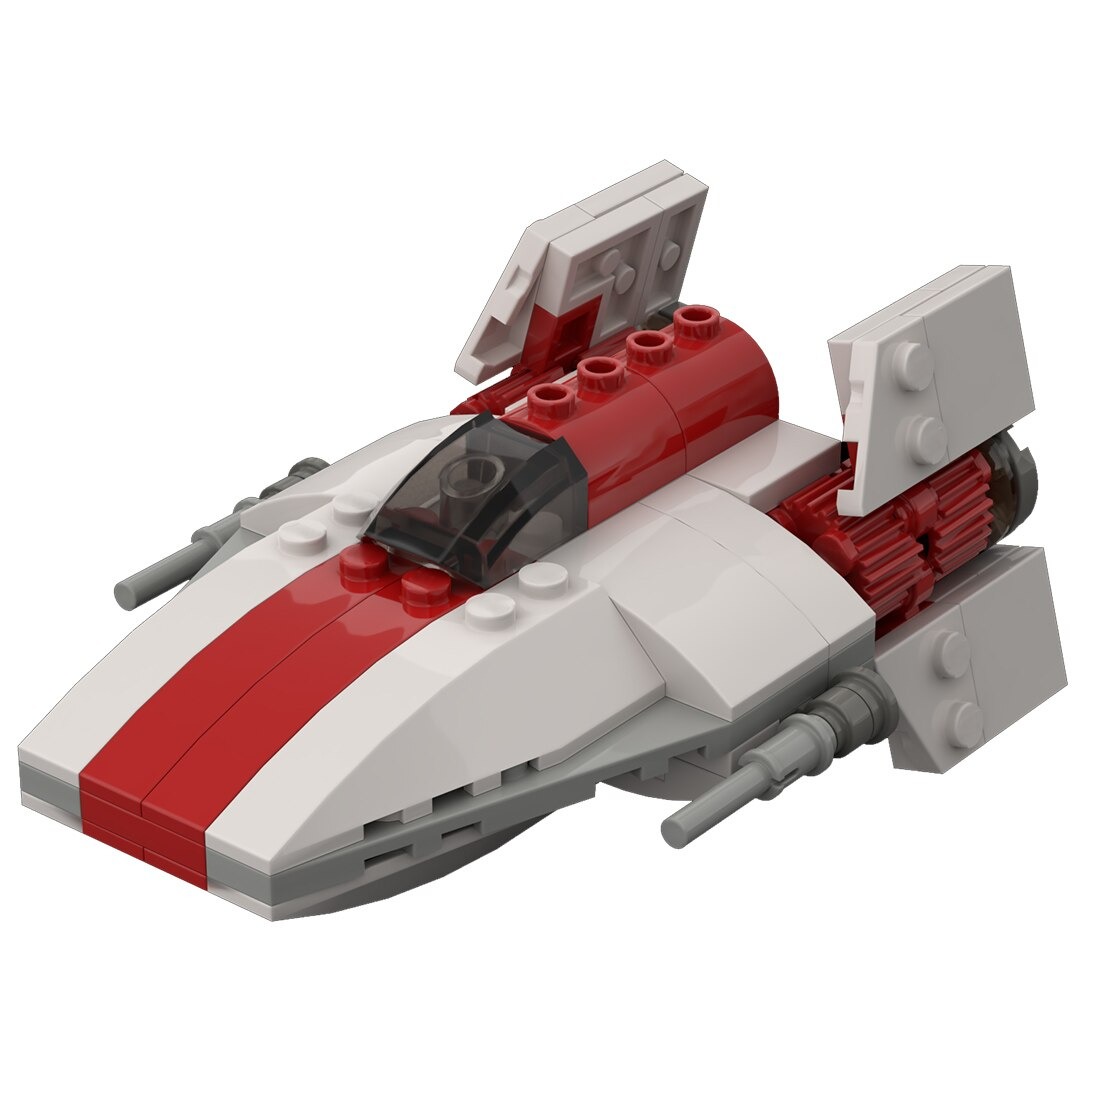 Moc 79097 Rebel A Wing Microfighter Sci Main 0